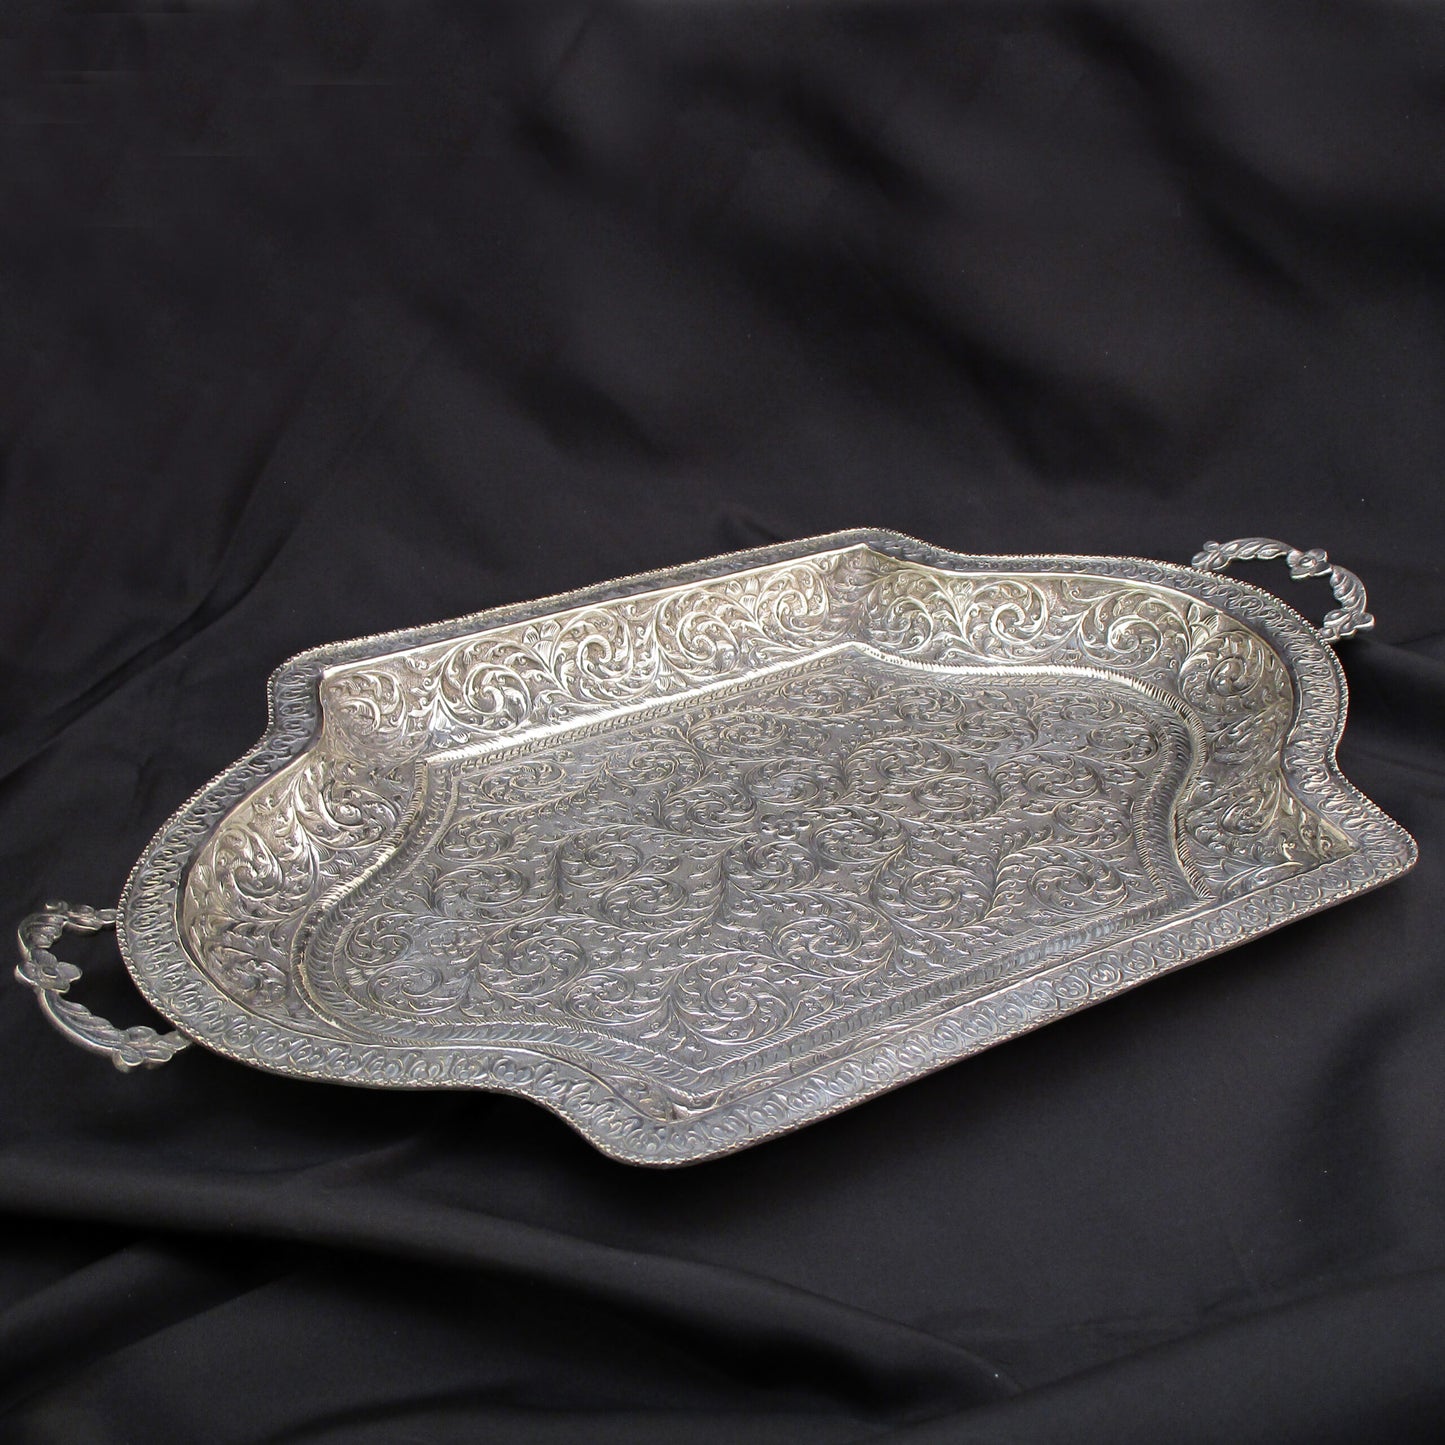 A large Indian silver tray.